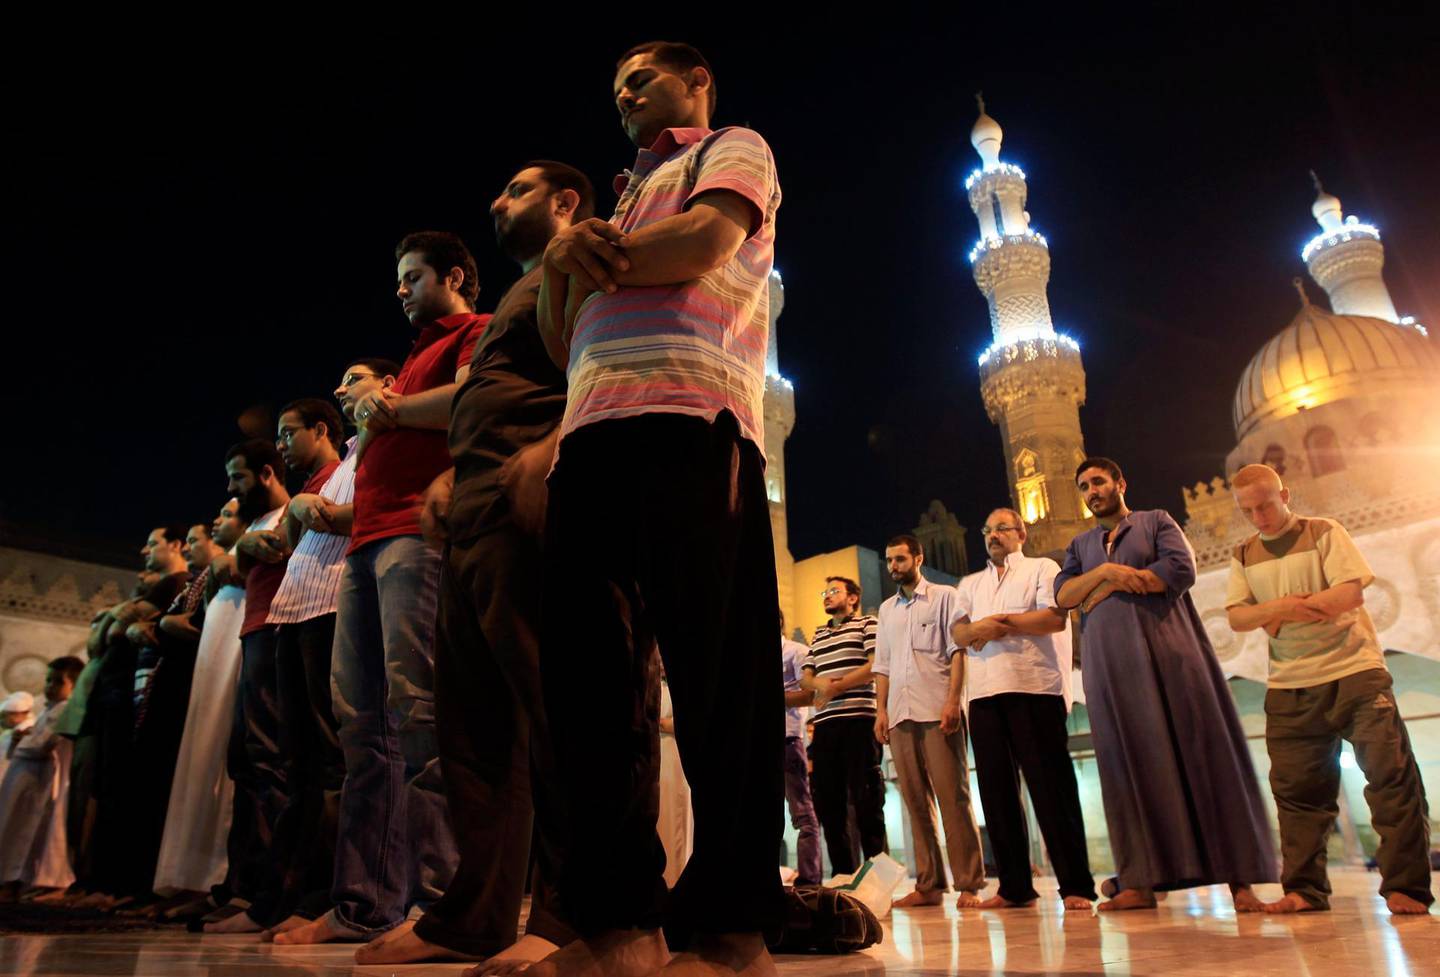 Muslim men attend an evening prayer called "Tarawih" to mark the beginning of the holy fasting month of Ramadan, at Al Azhar mosque in Cairo July 31, 2011. Millions of Muslims worldwide celebrate on Monday the beginning of Ramadan, the holiest month in the Islamic calendar when Muslims abstain from eating, drinking and conducting sexual relations from sunrise to sunset. REUTERS/Amr Abdallah Dalsh  (EGYPT - Tags: SOCIETY RELIGION) *** Local Caption ***  AMR001_EGYPT_0801_11.JPG